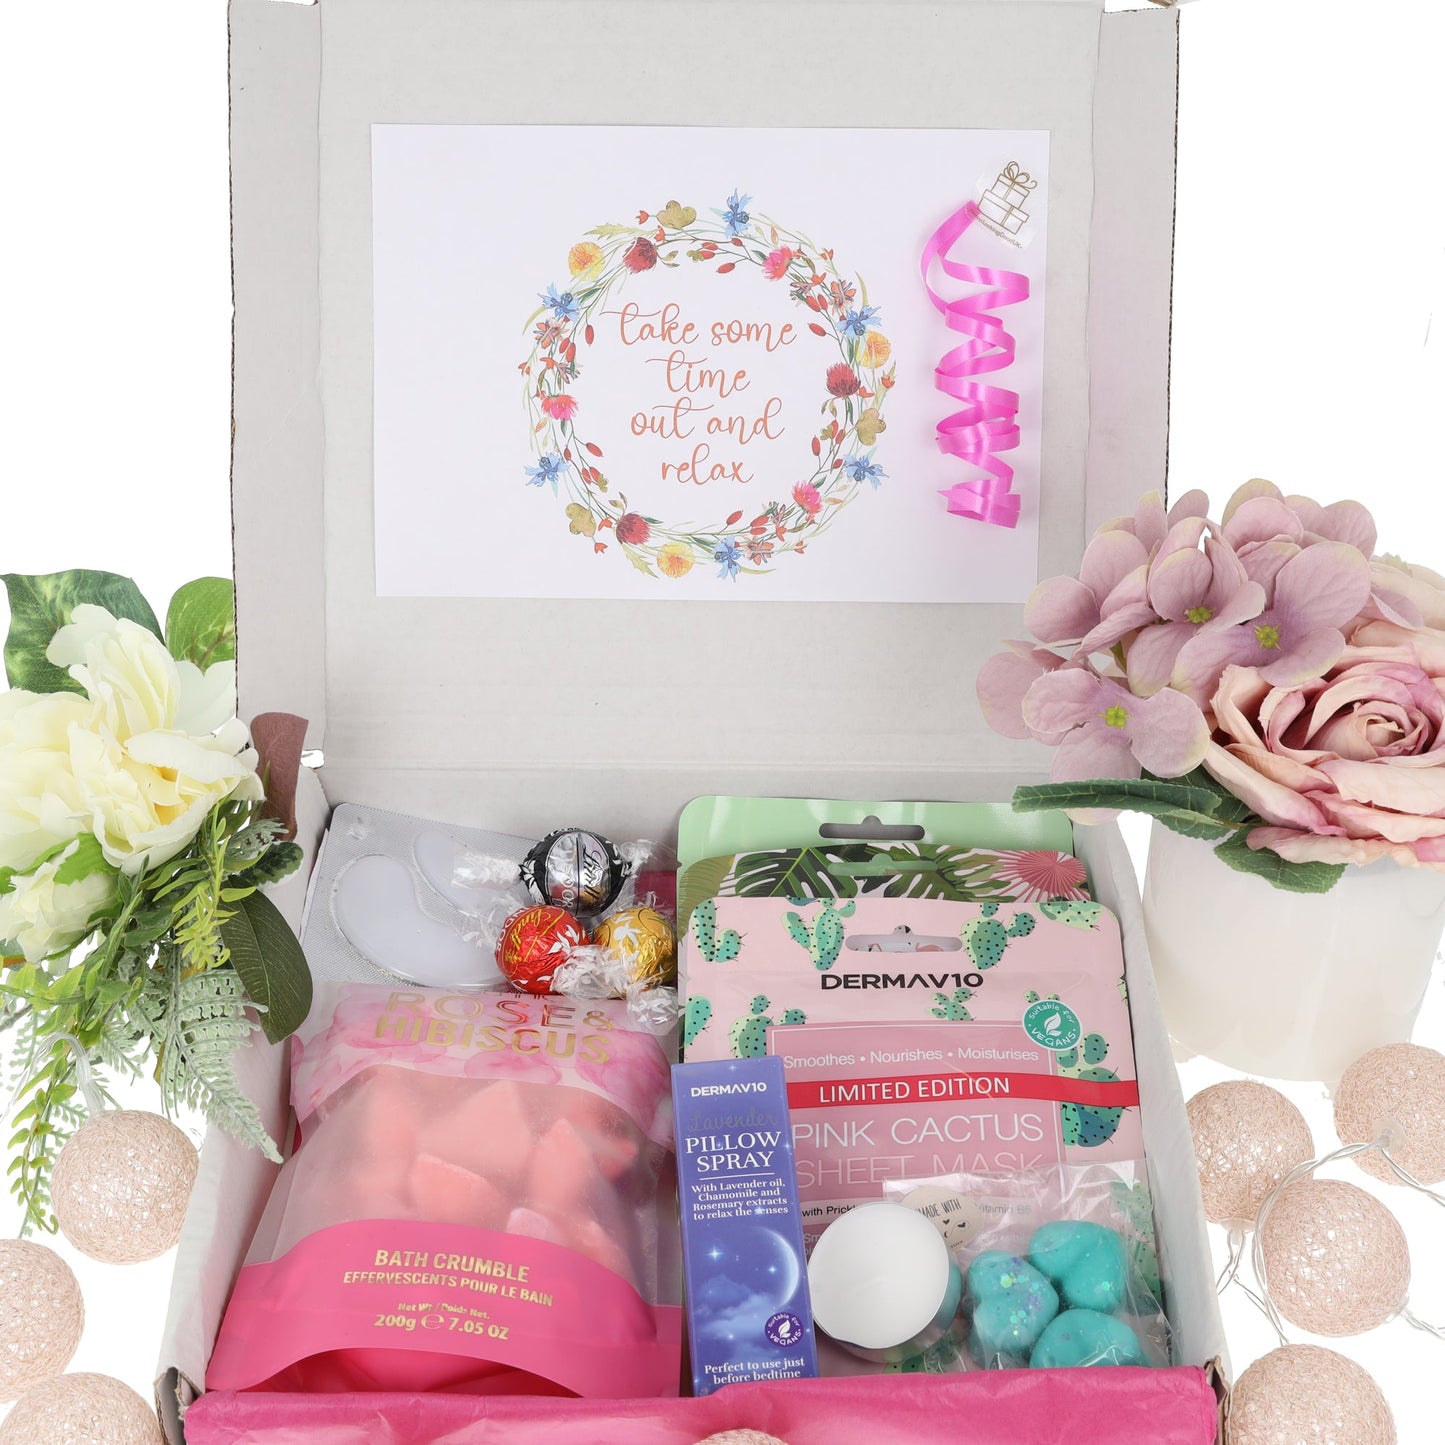 Mother's Day Bath Crumble and Pamper Gift Pamper Hamper Large Set  - Always Looking Good -   